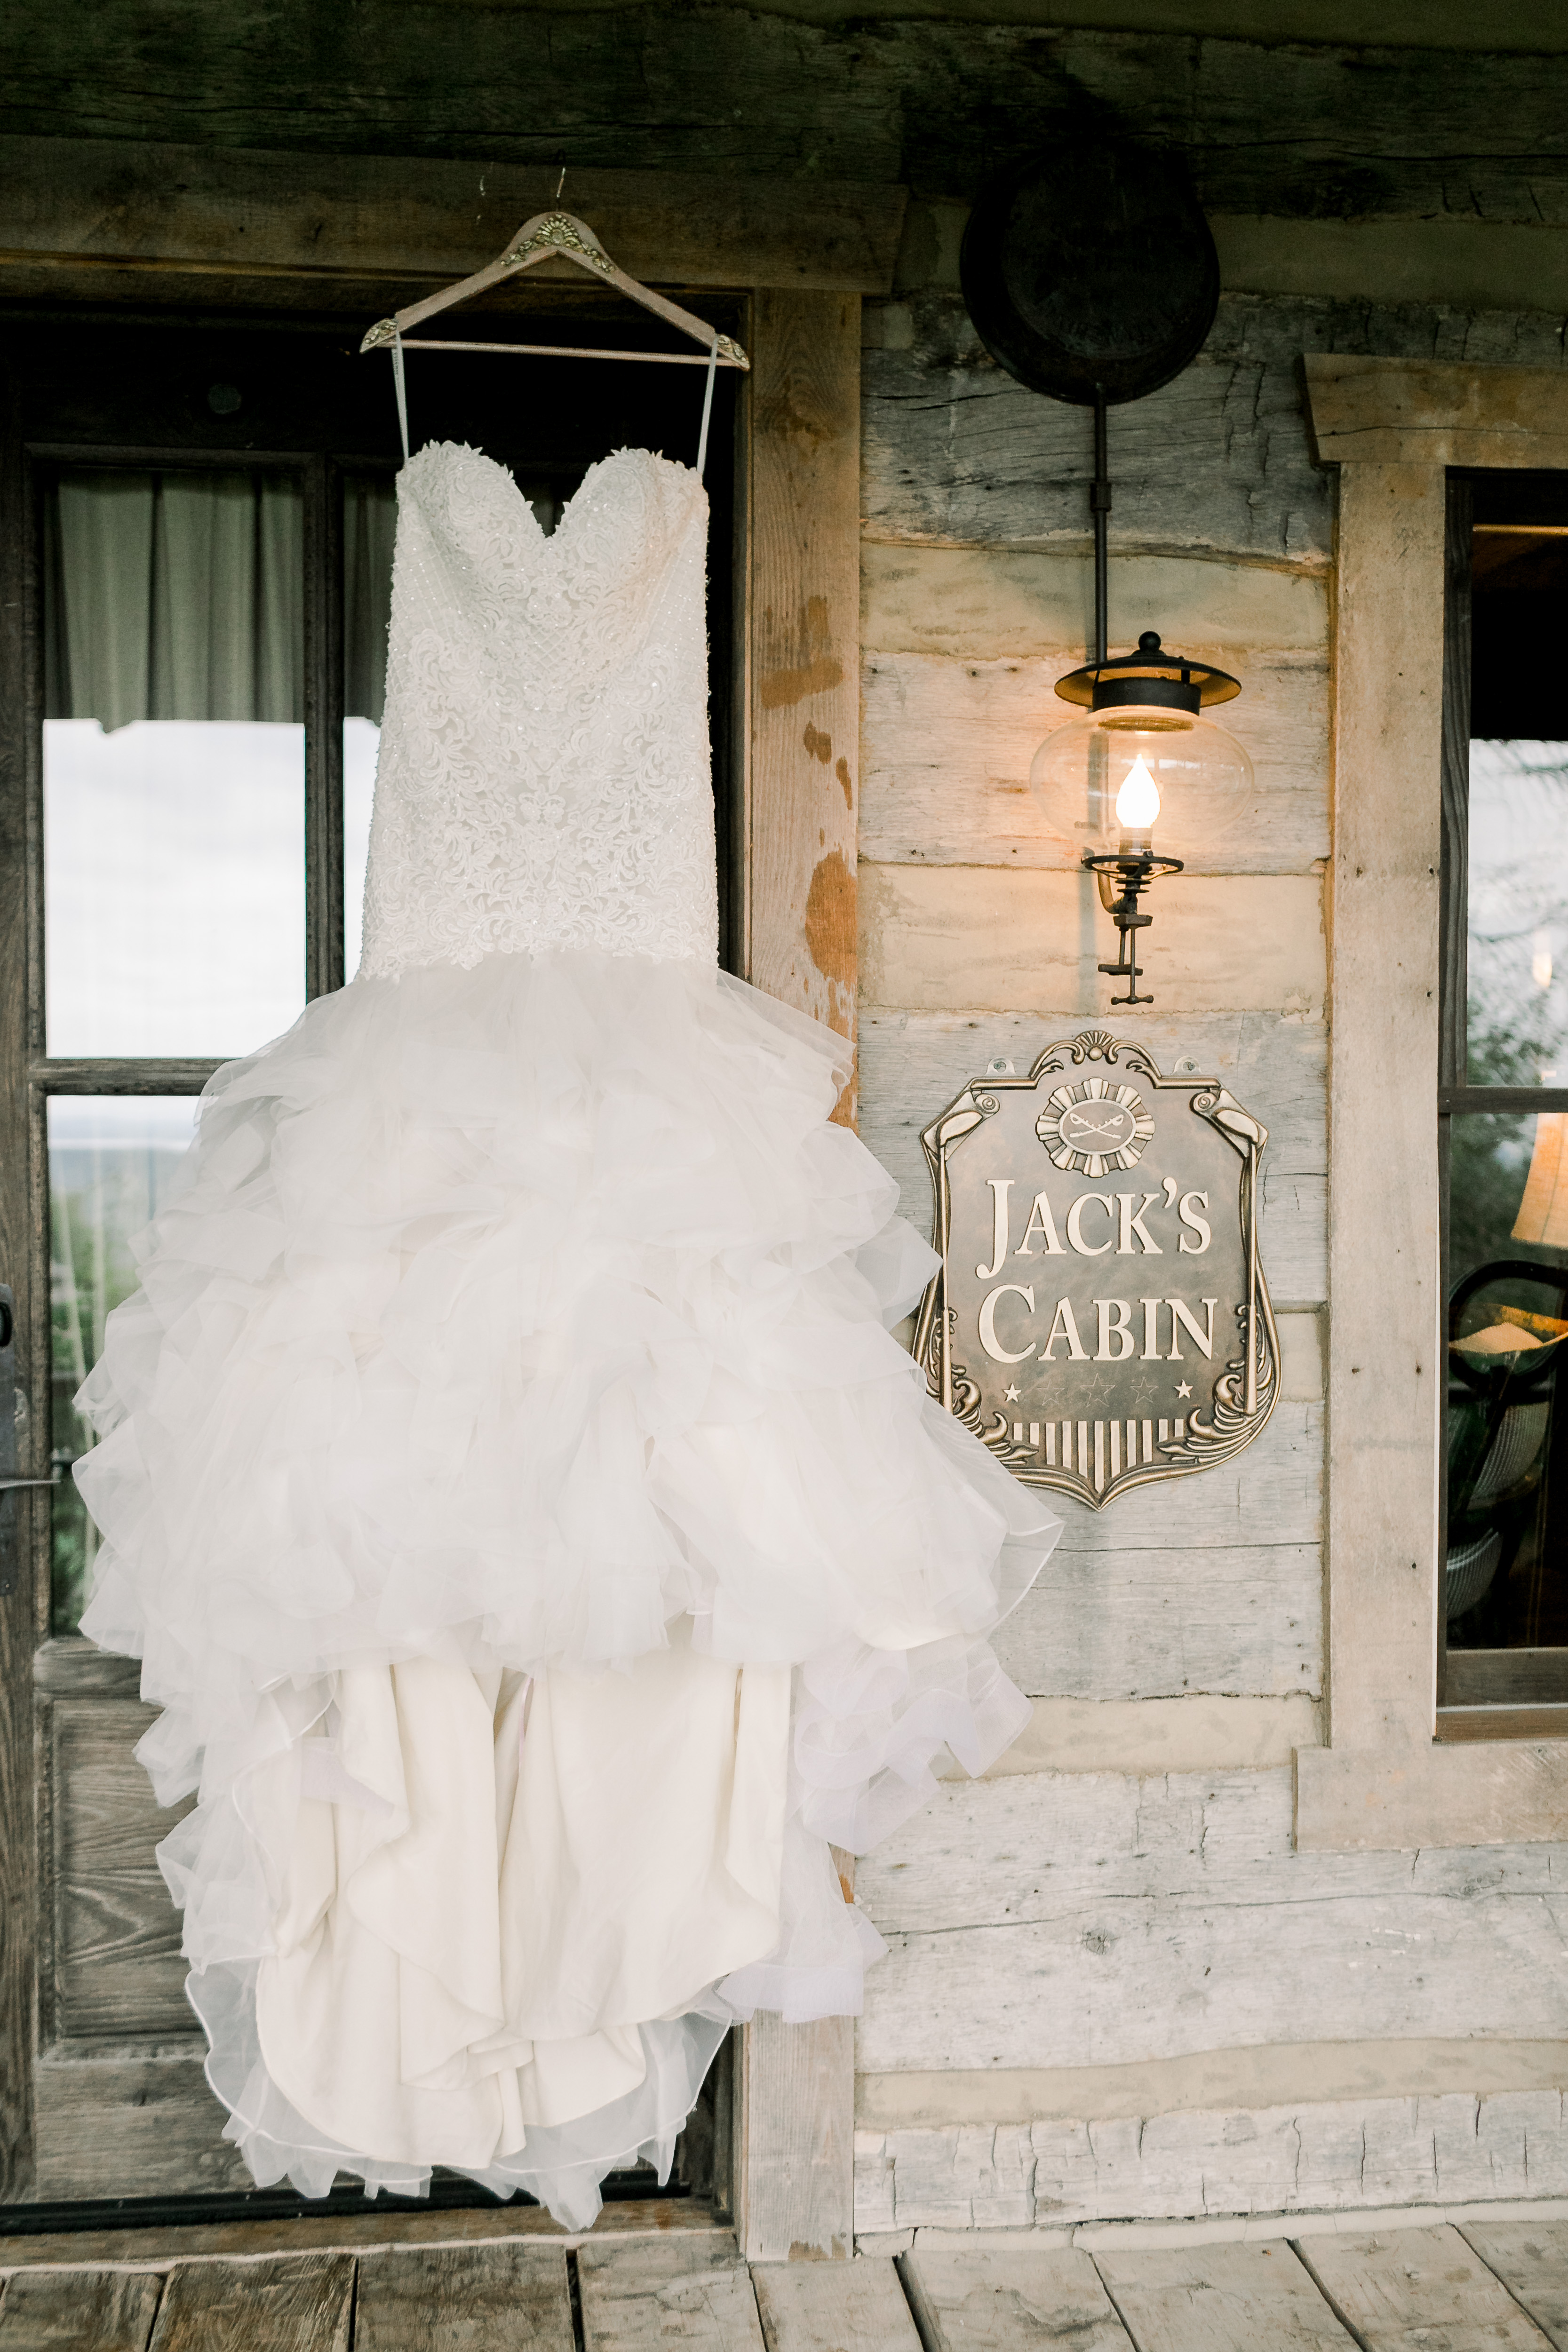 Rustic Fall Wedding in the Ozark Mountains in Branson, Missouri featured by top US lifestyle blog, Walking in Memphis in High Heels.